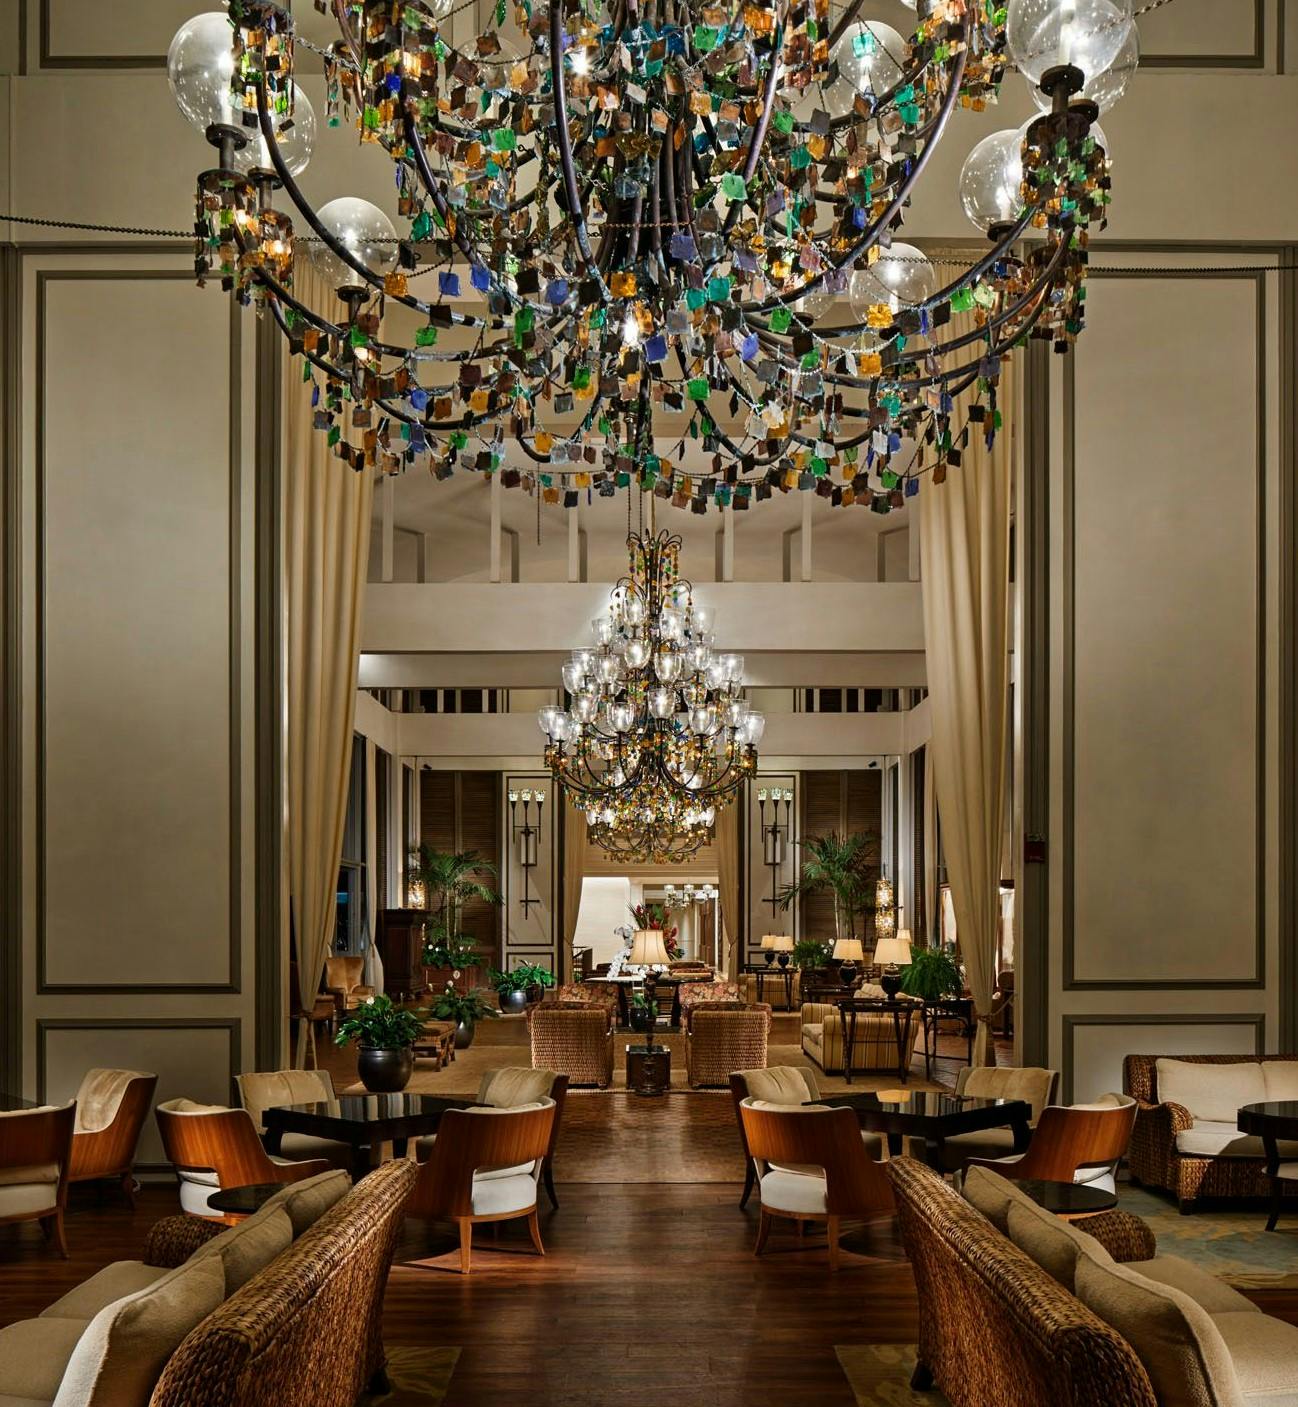 Chandeliers of colored sea glass